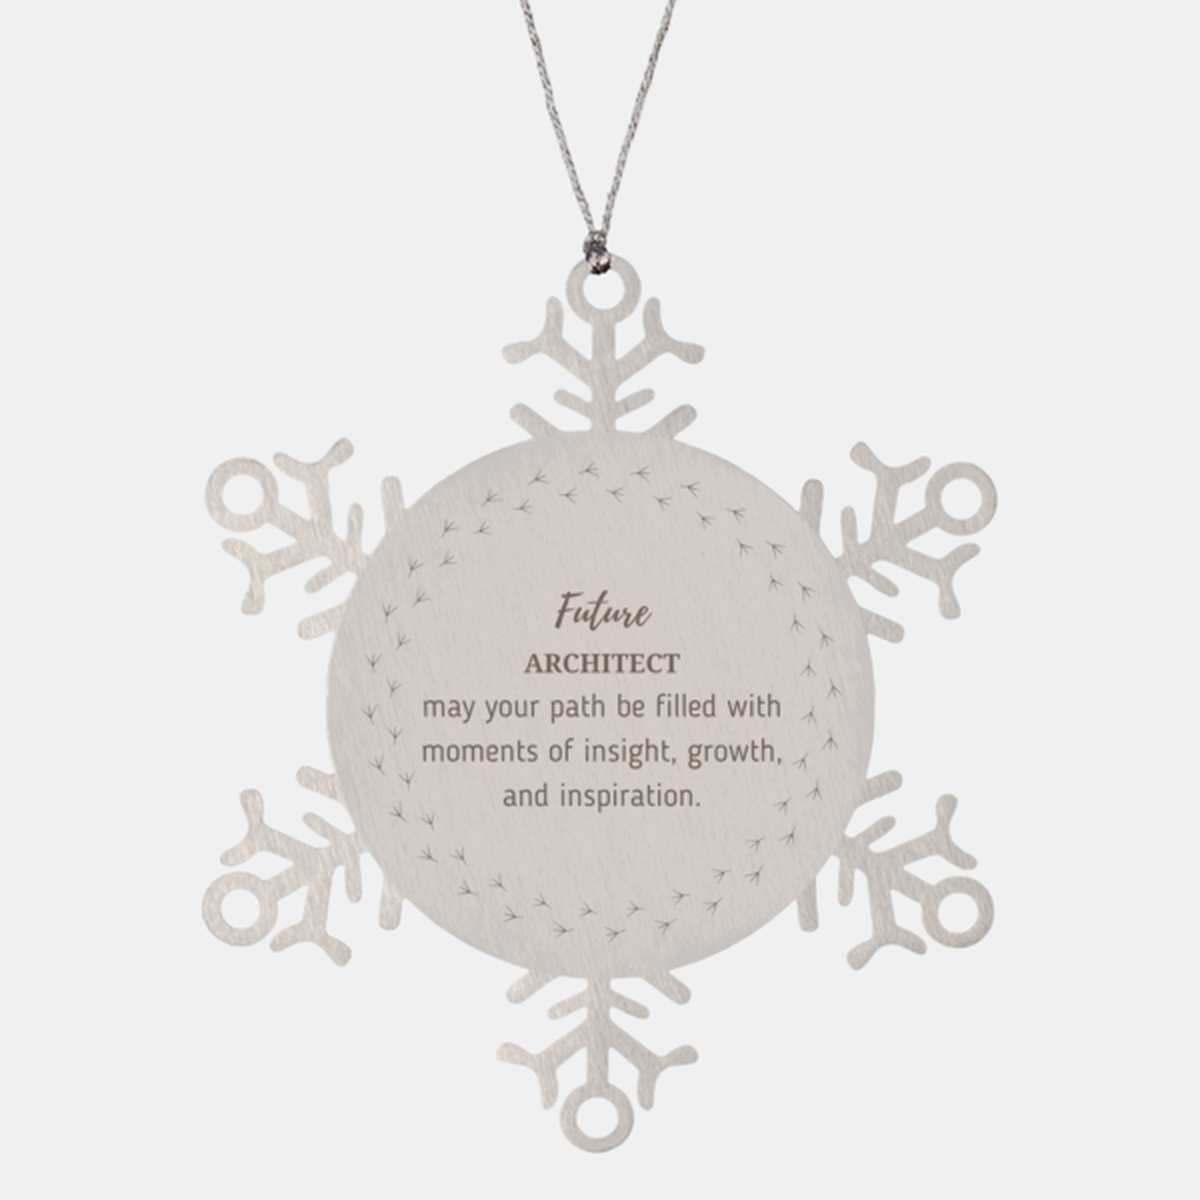 Future Architect Gifts, May your path be filled with moments of insight, Graduation Gifts for New Architect, Christmas Unique Snowflake Ornament For Men, Women, Friends